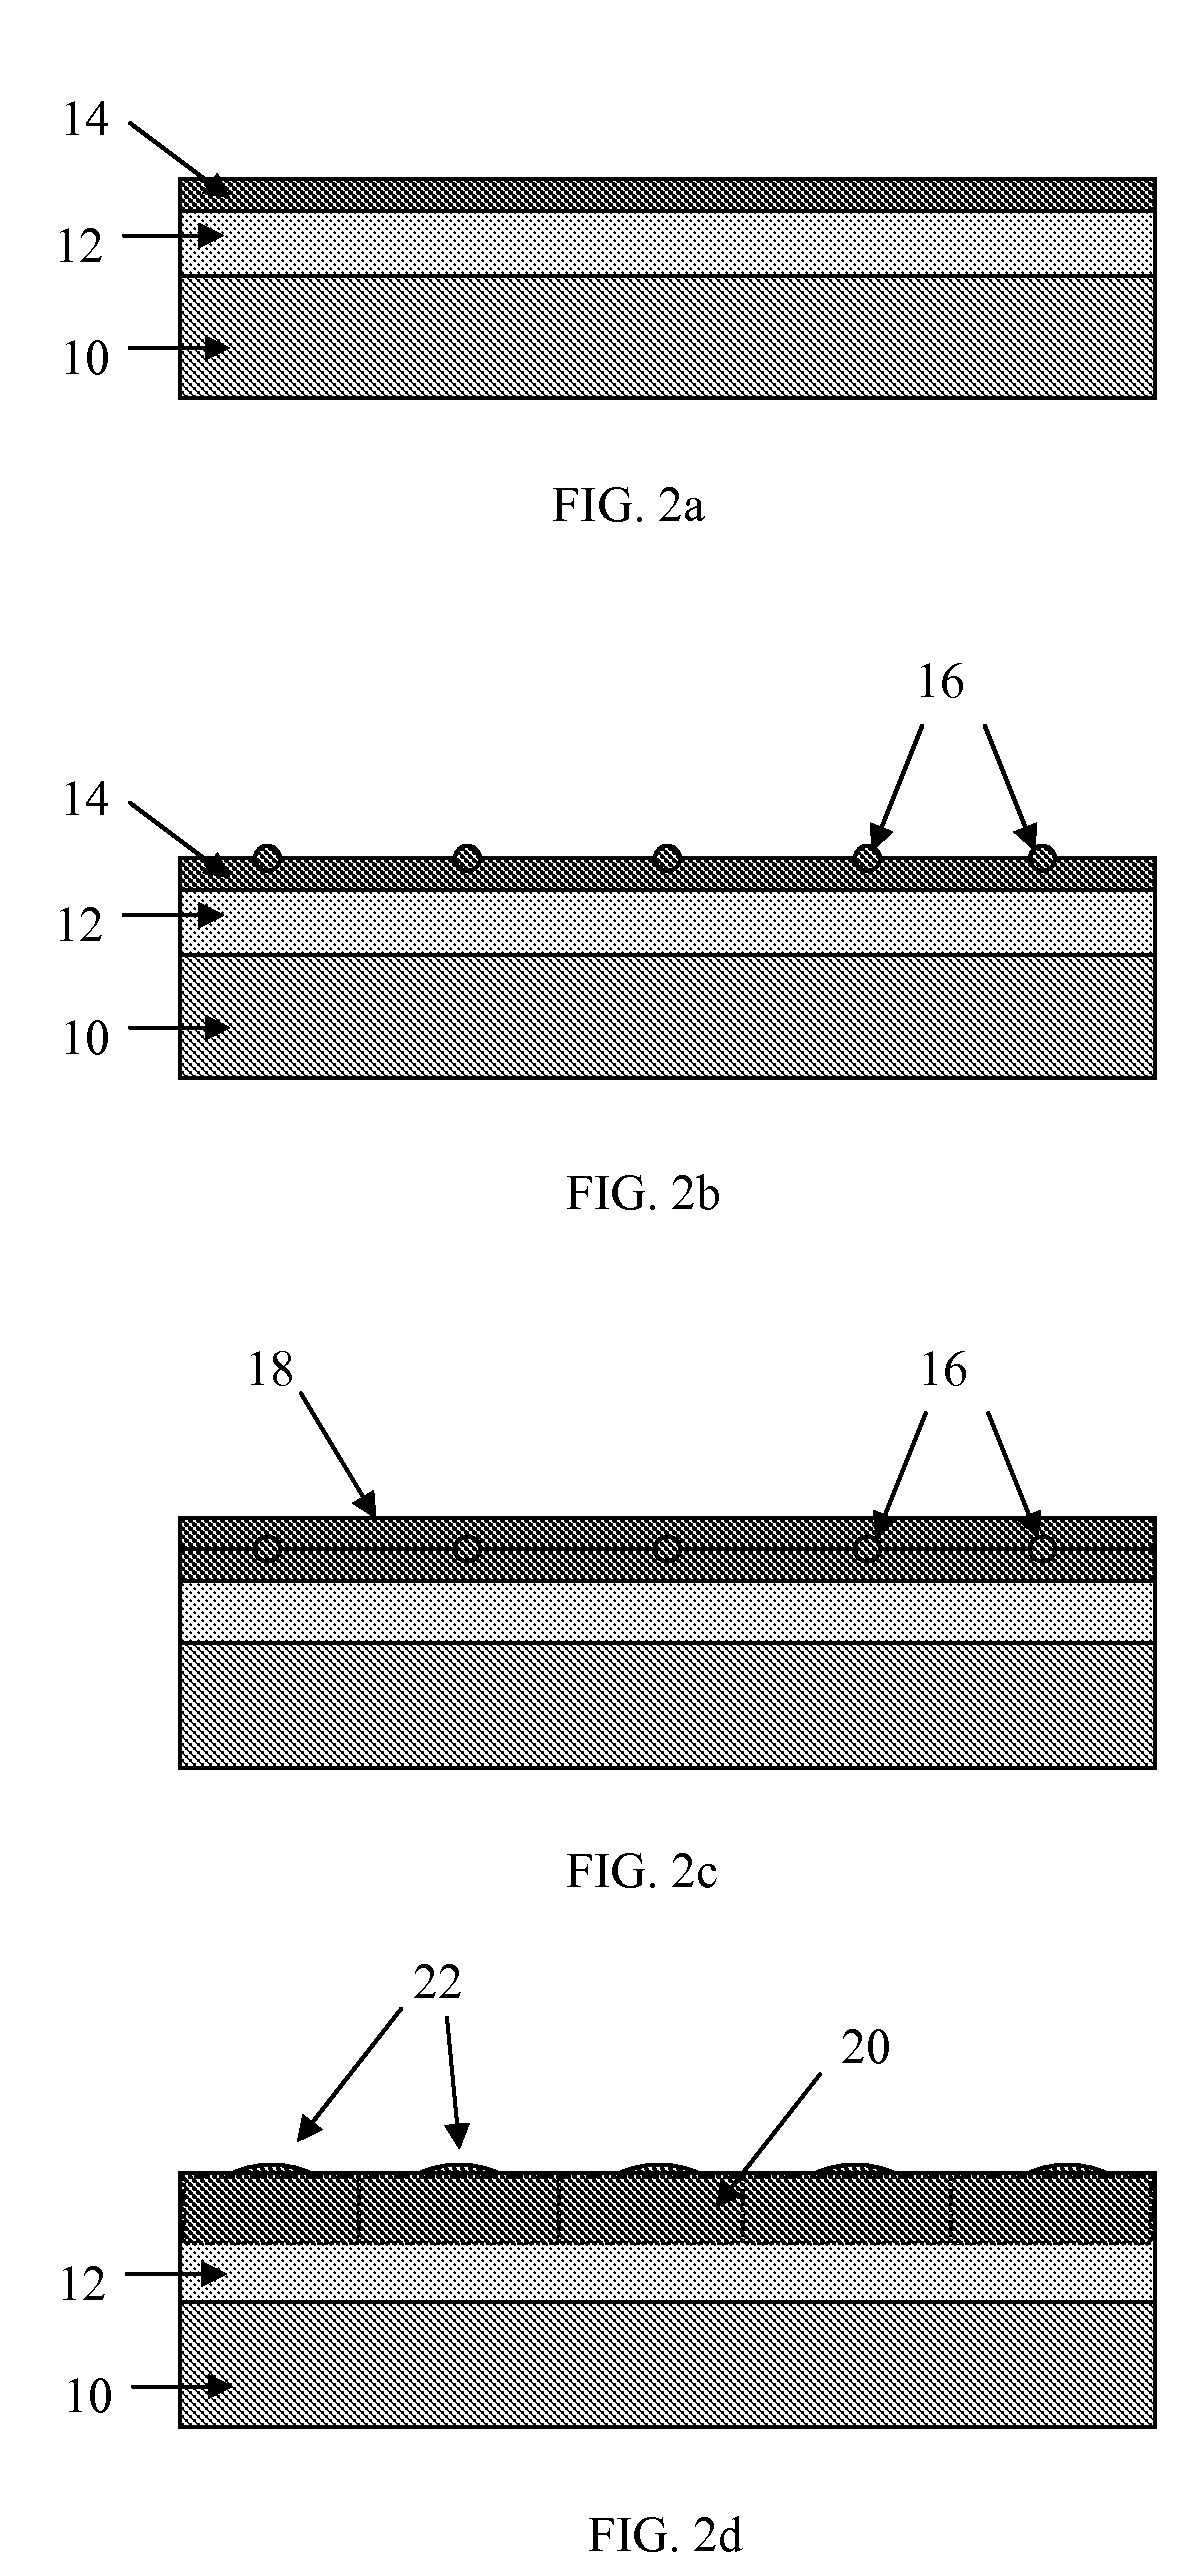 Method to form large grain size polysilicon films by nuclei-induced solid phase crystallization